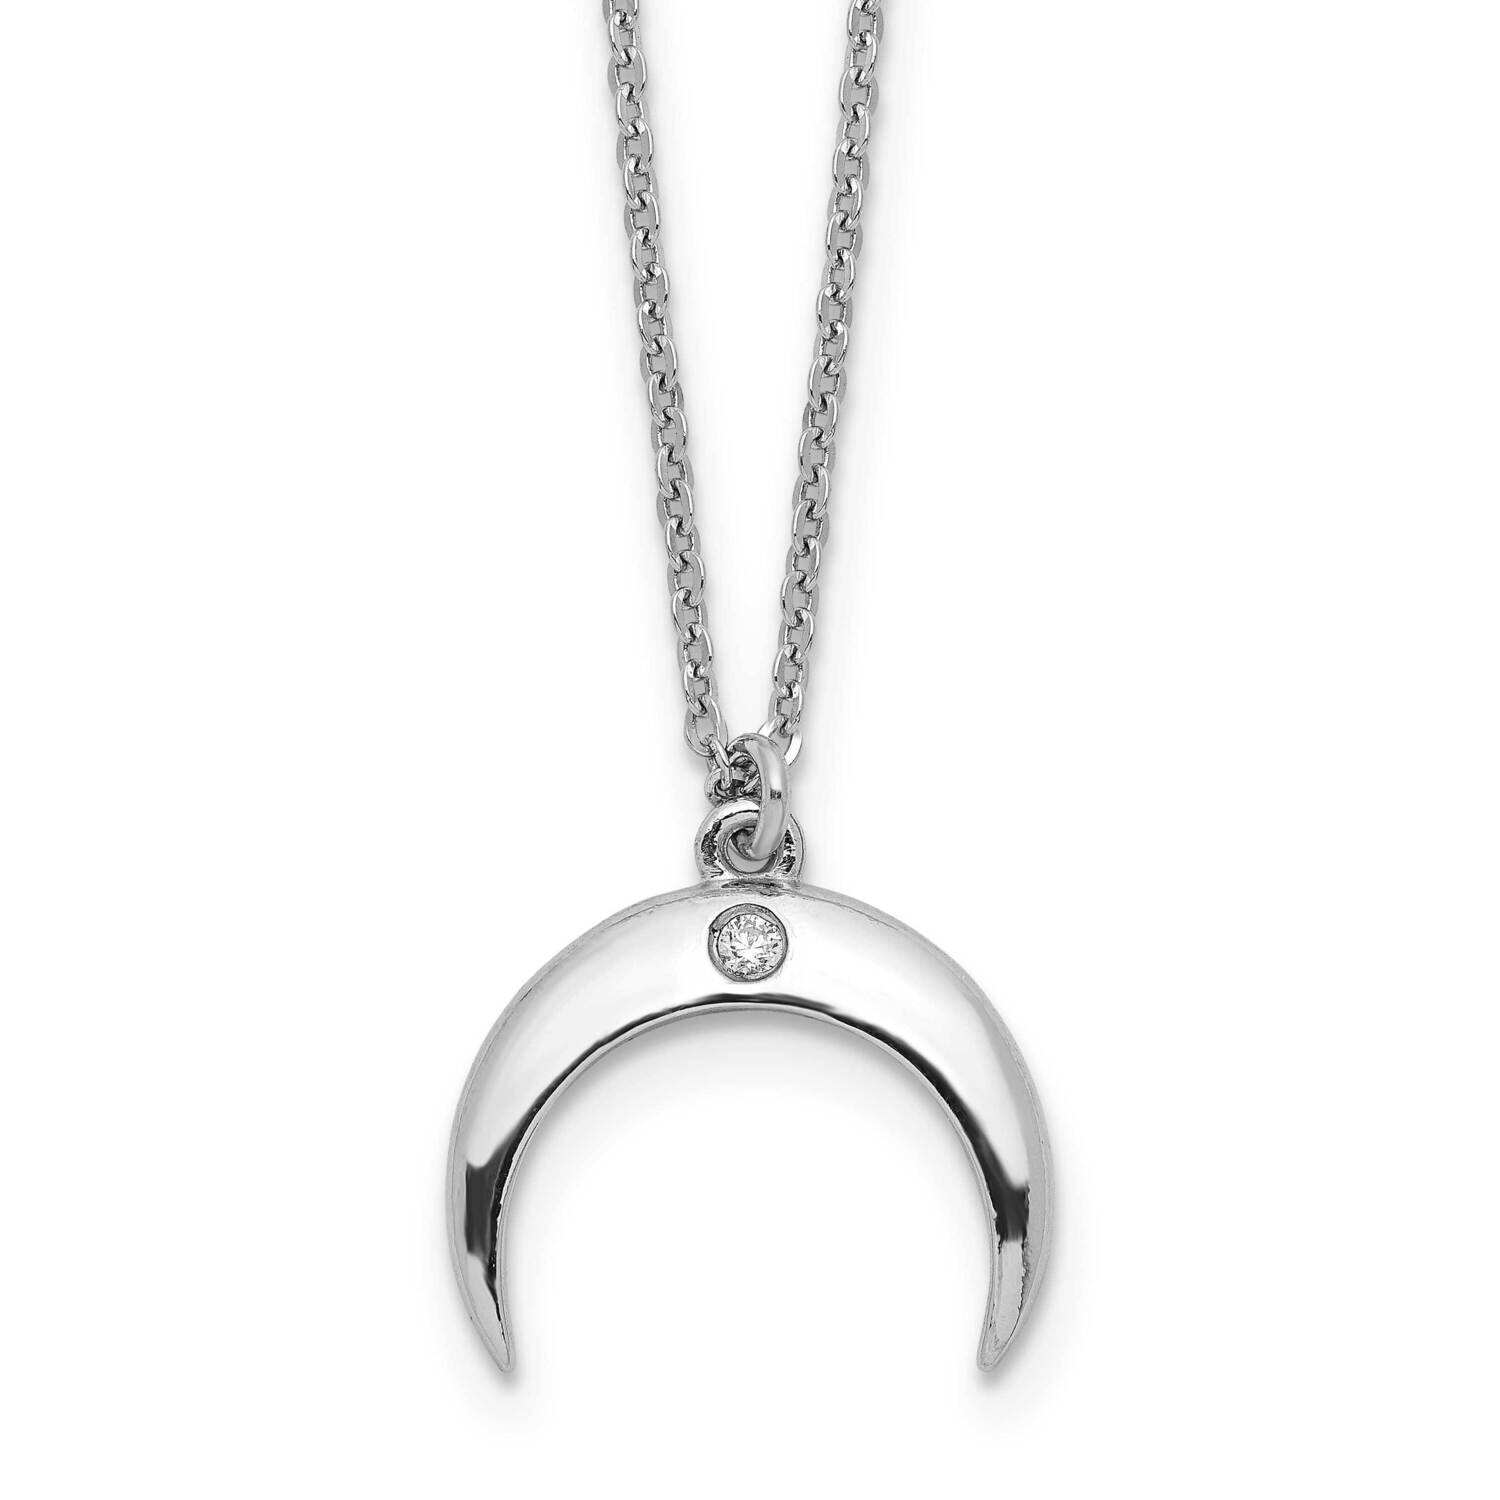 CZ Diamond Moon Necklace 16 Inch Sterling Silver Rhodium-Plated QG6100-16